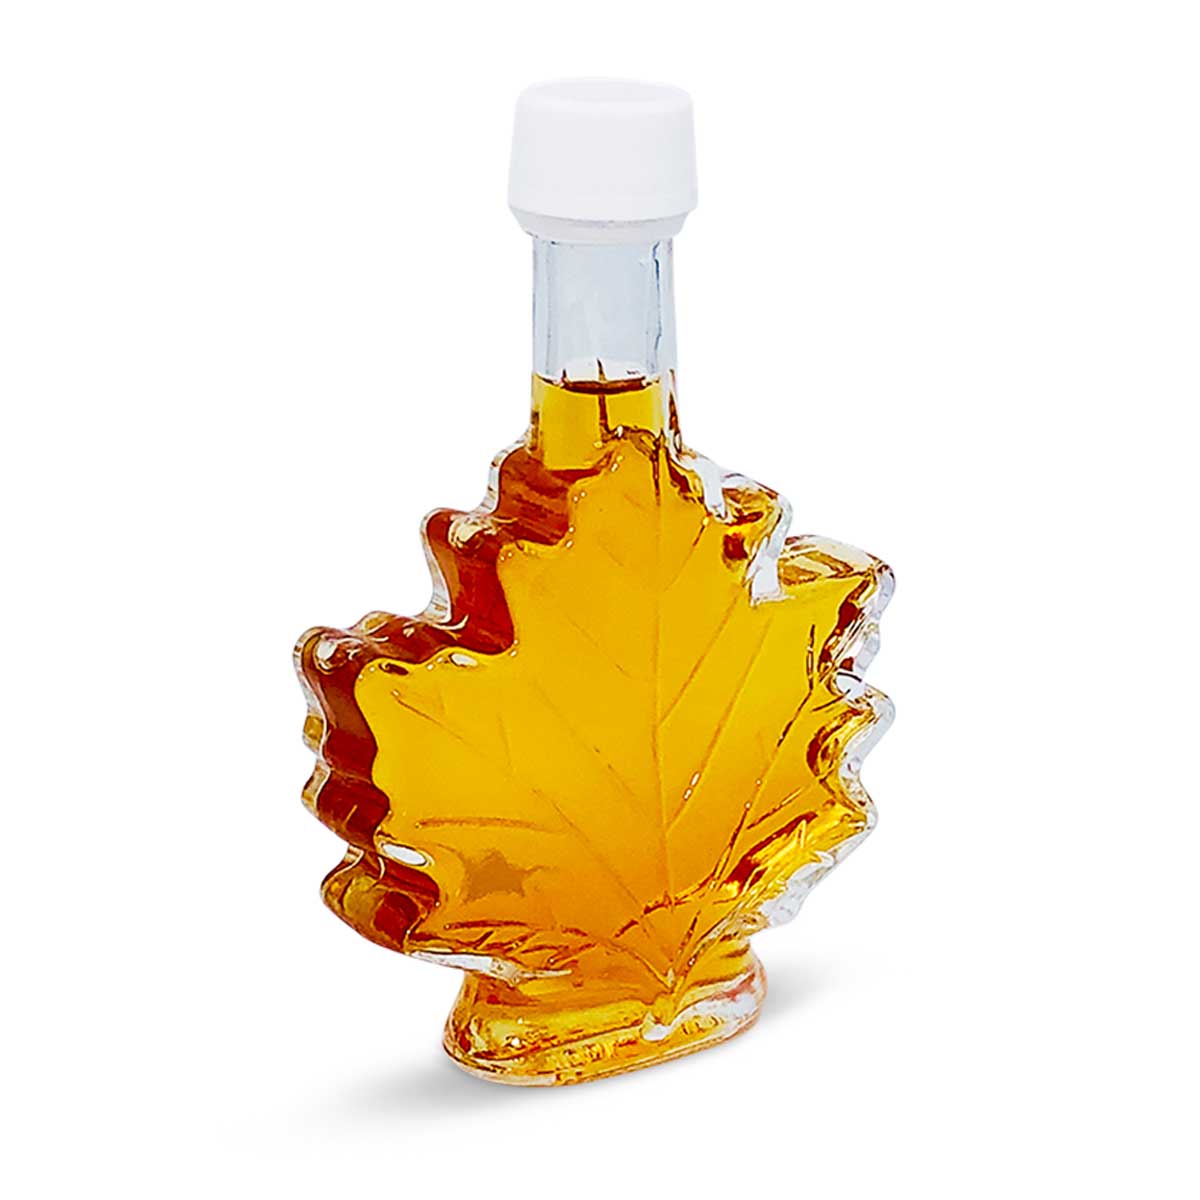 8oz Clear Glass Syrup Bottle at